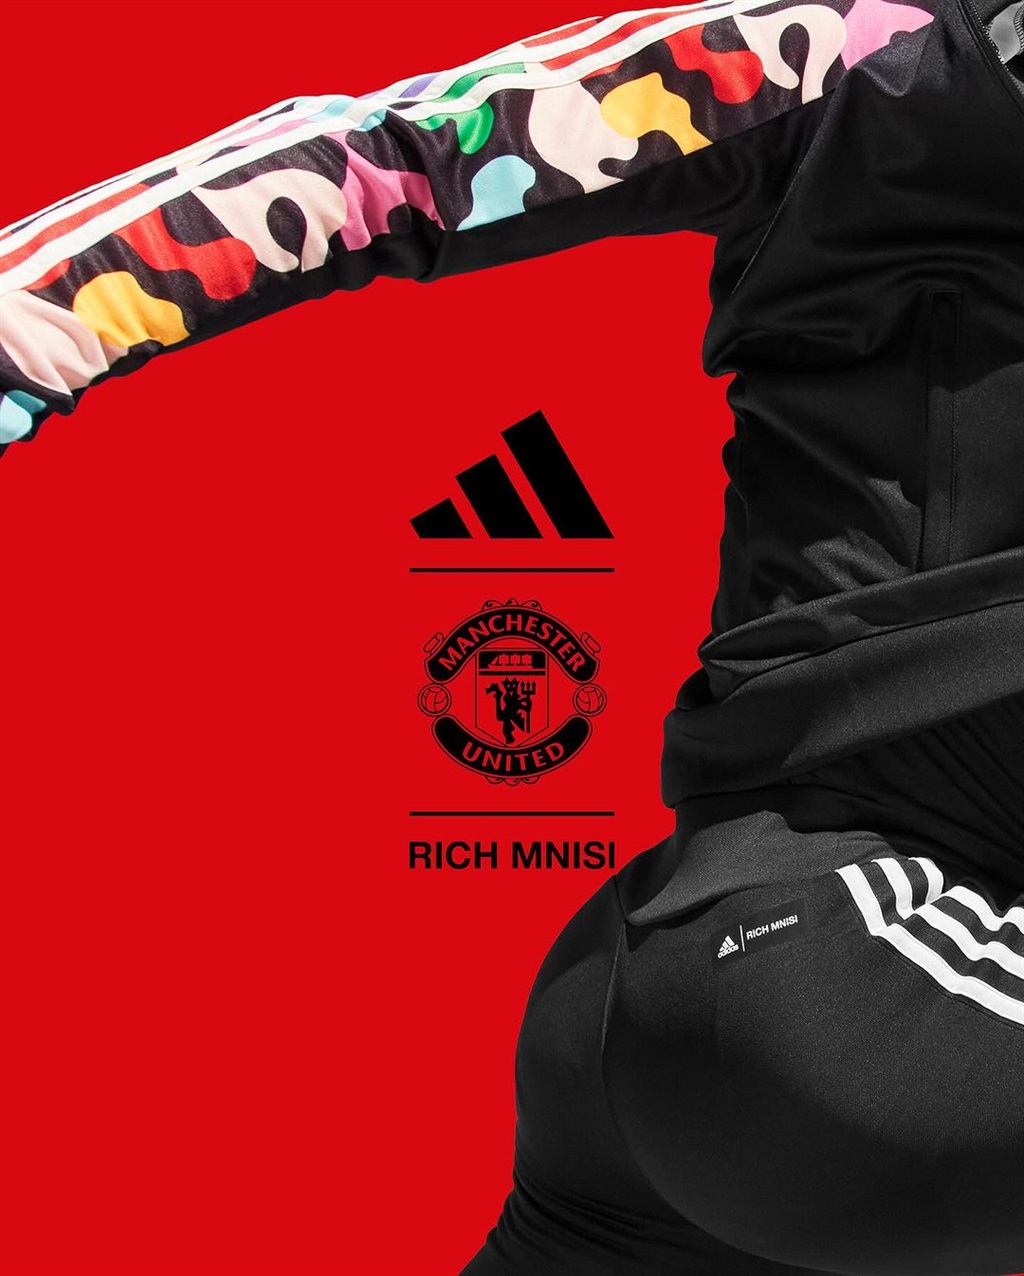 South African brand Rich Mnisi has unveiled their 'LOVE UNITES' adidas collection with Manchester United.